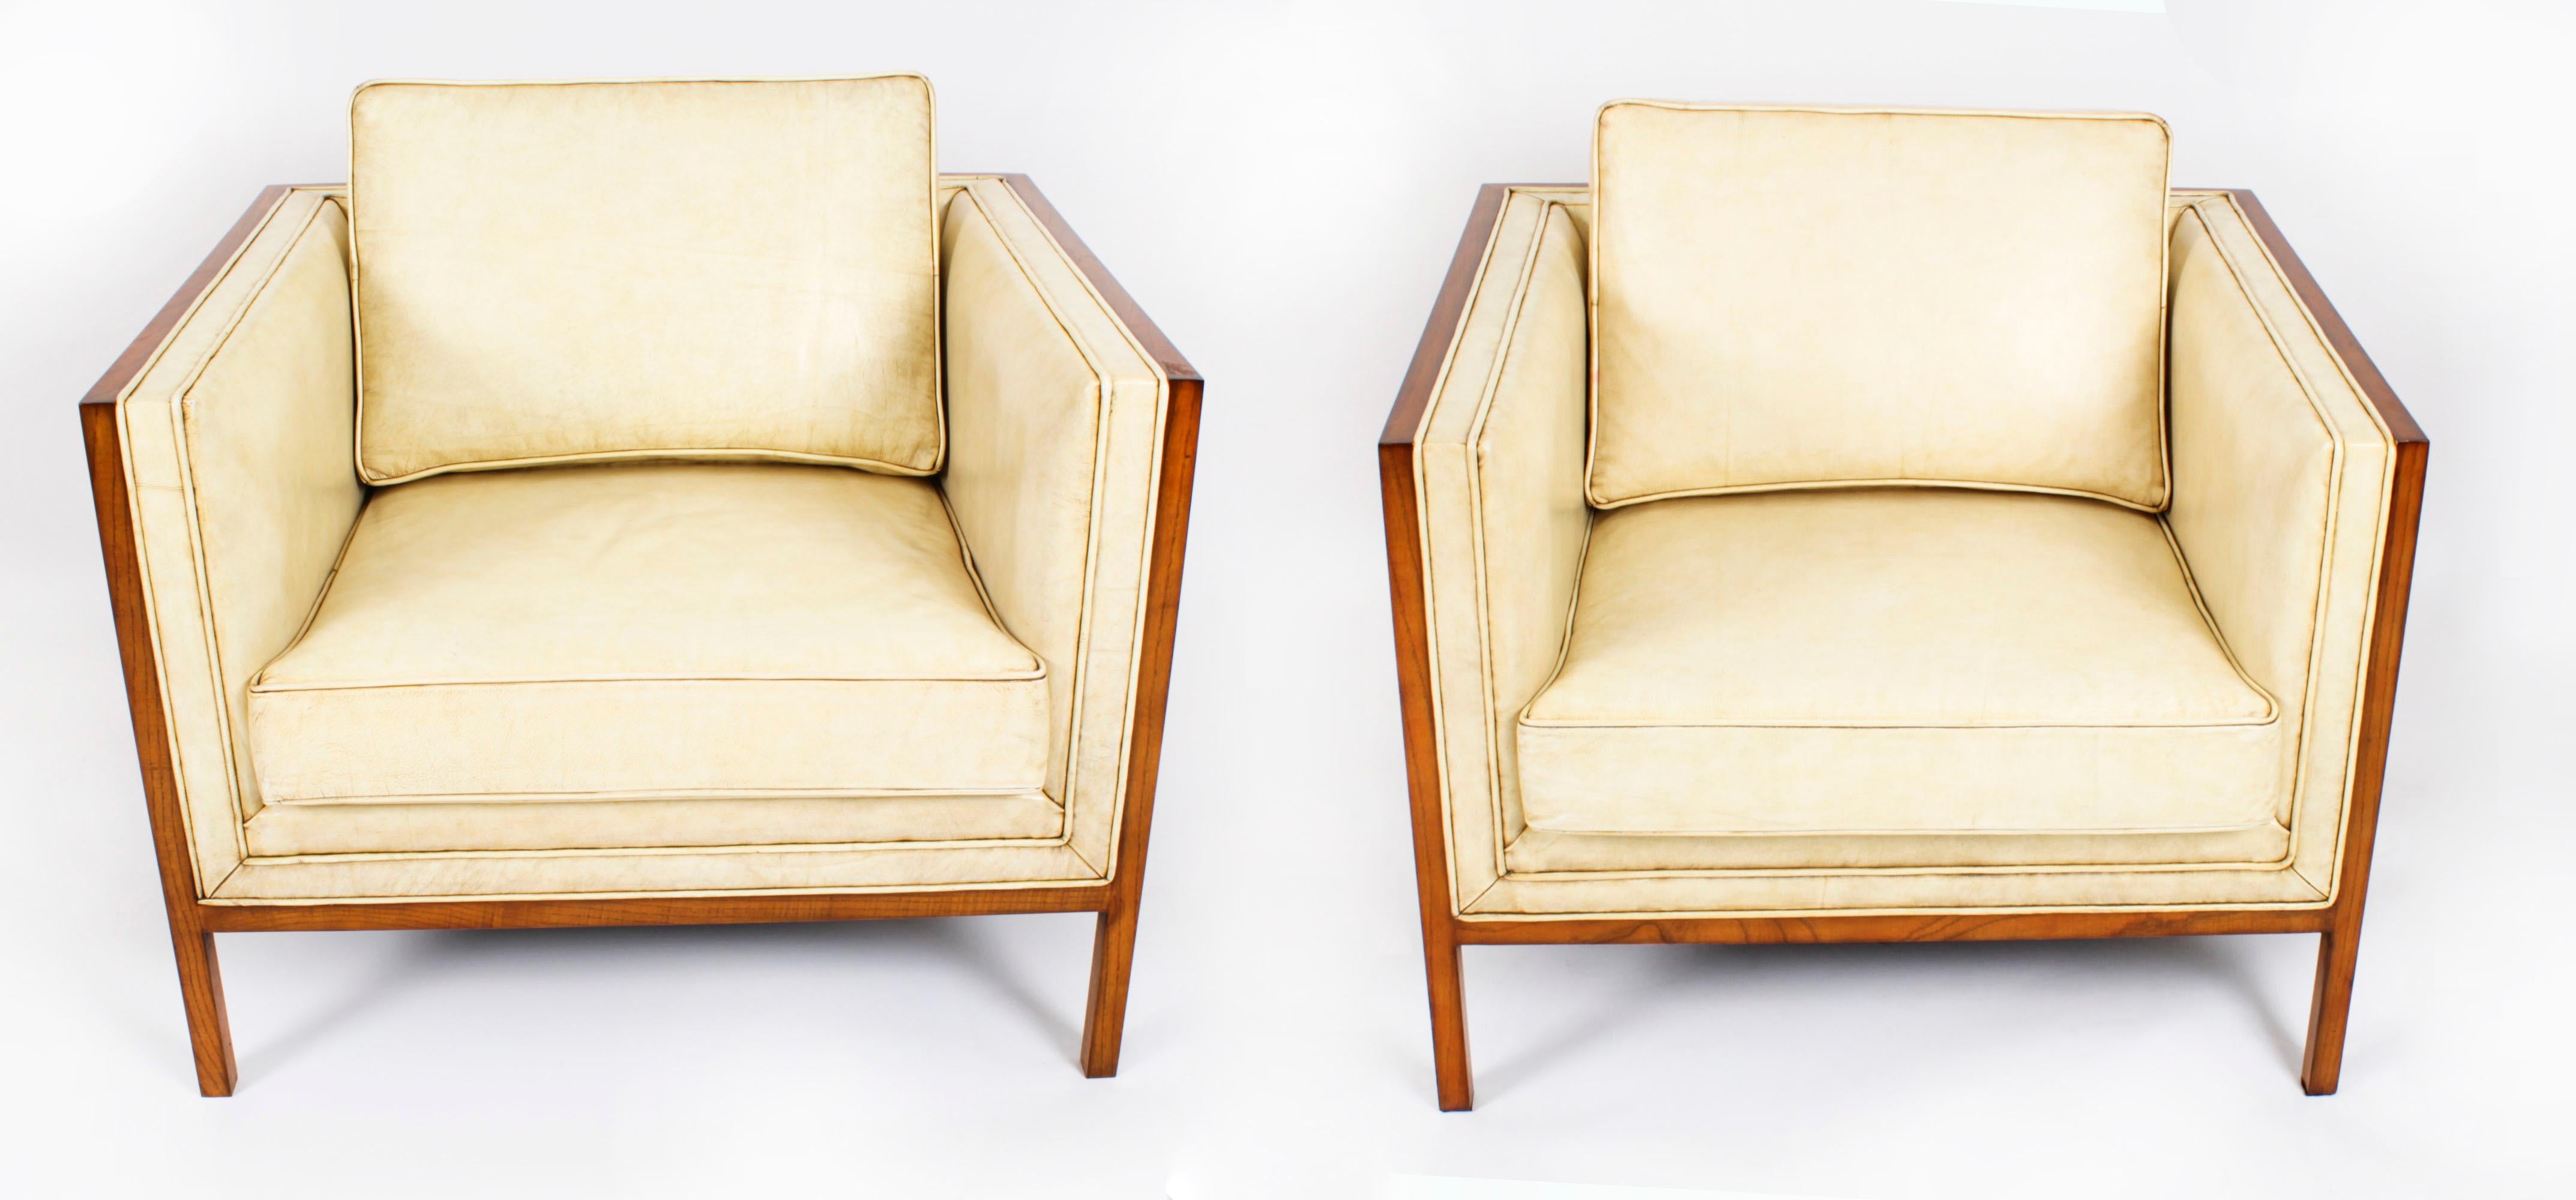 French Antique Pair Art Deco Burr Walnut & Cream Leather Armchairs Circa 1920 For Sale